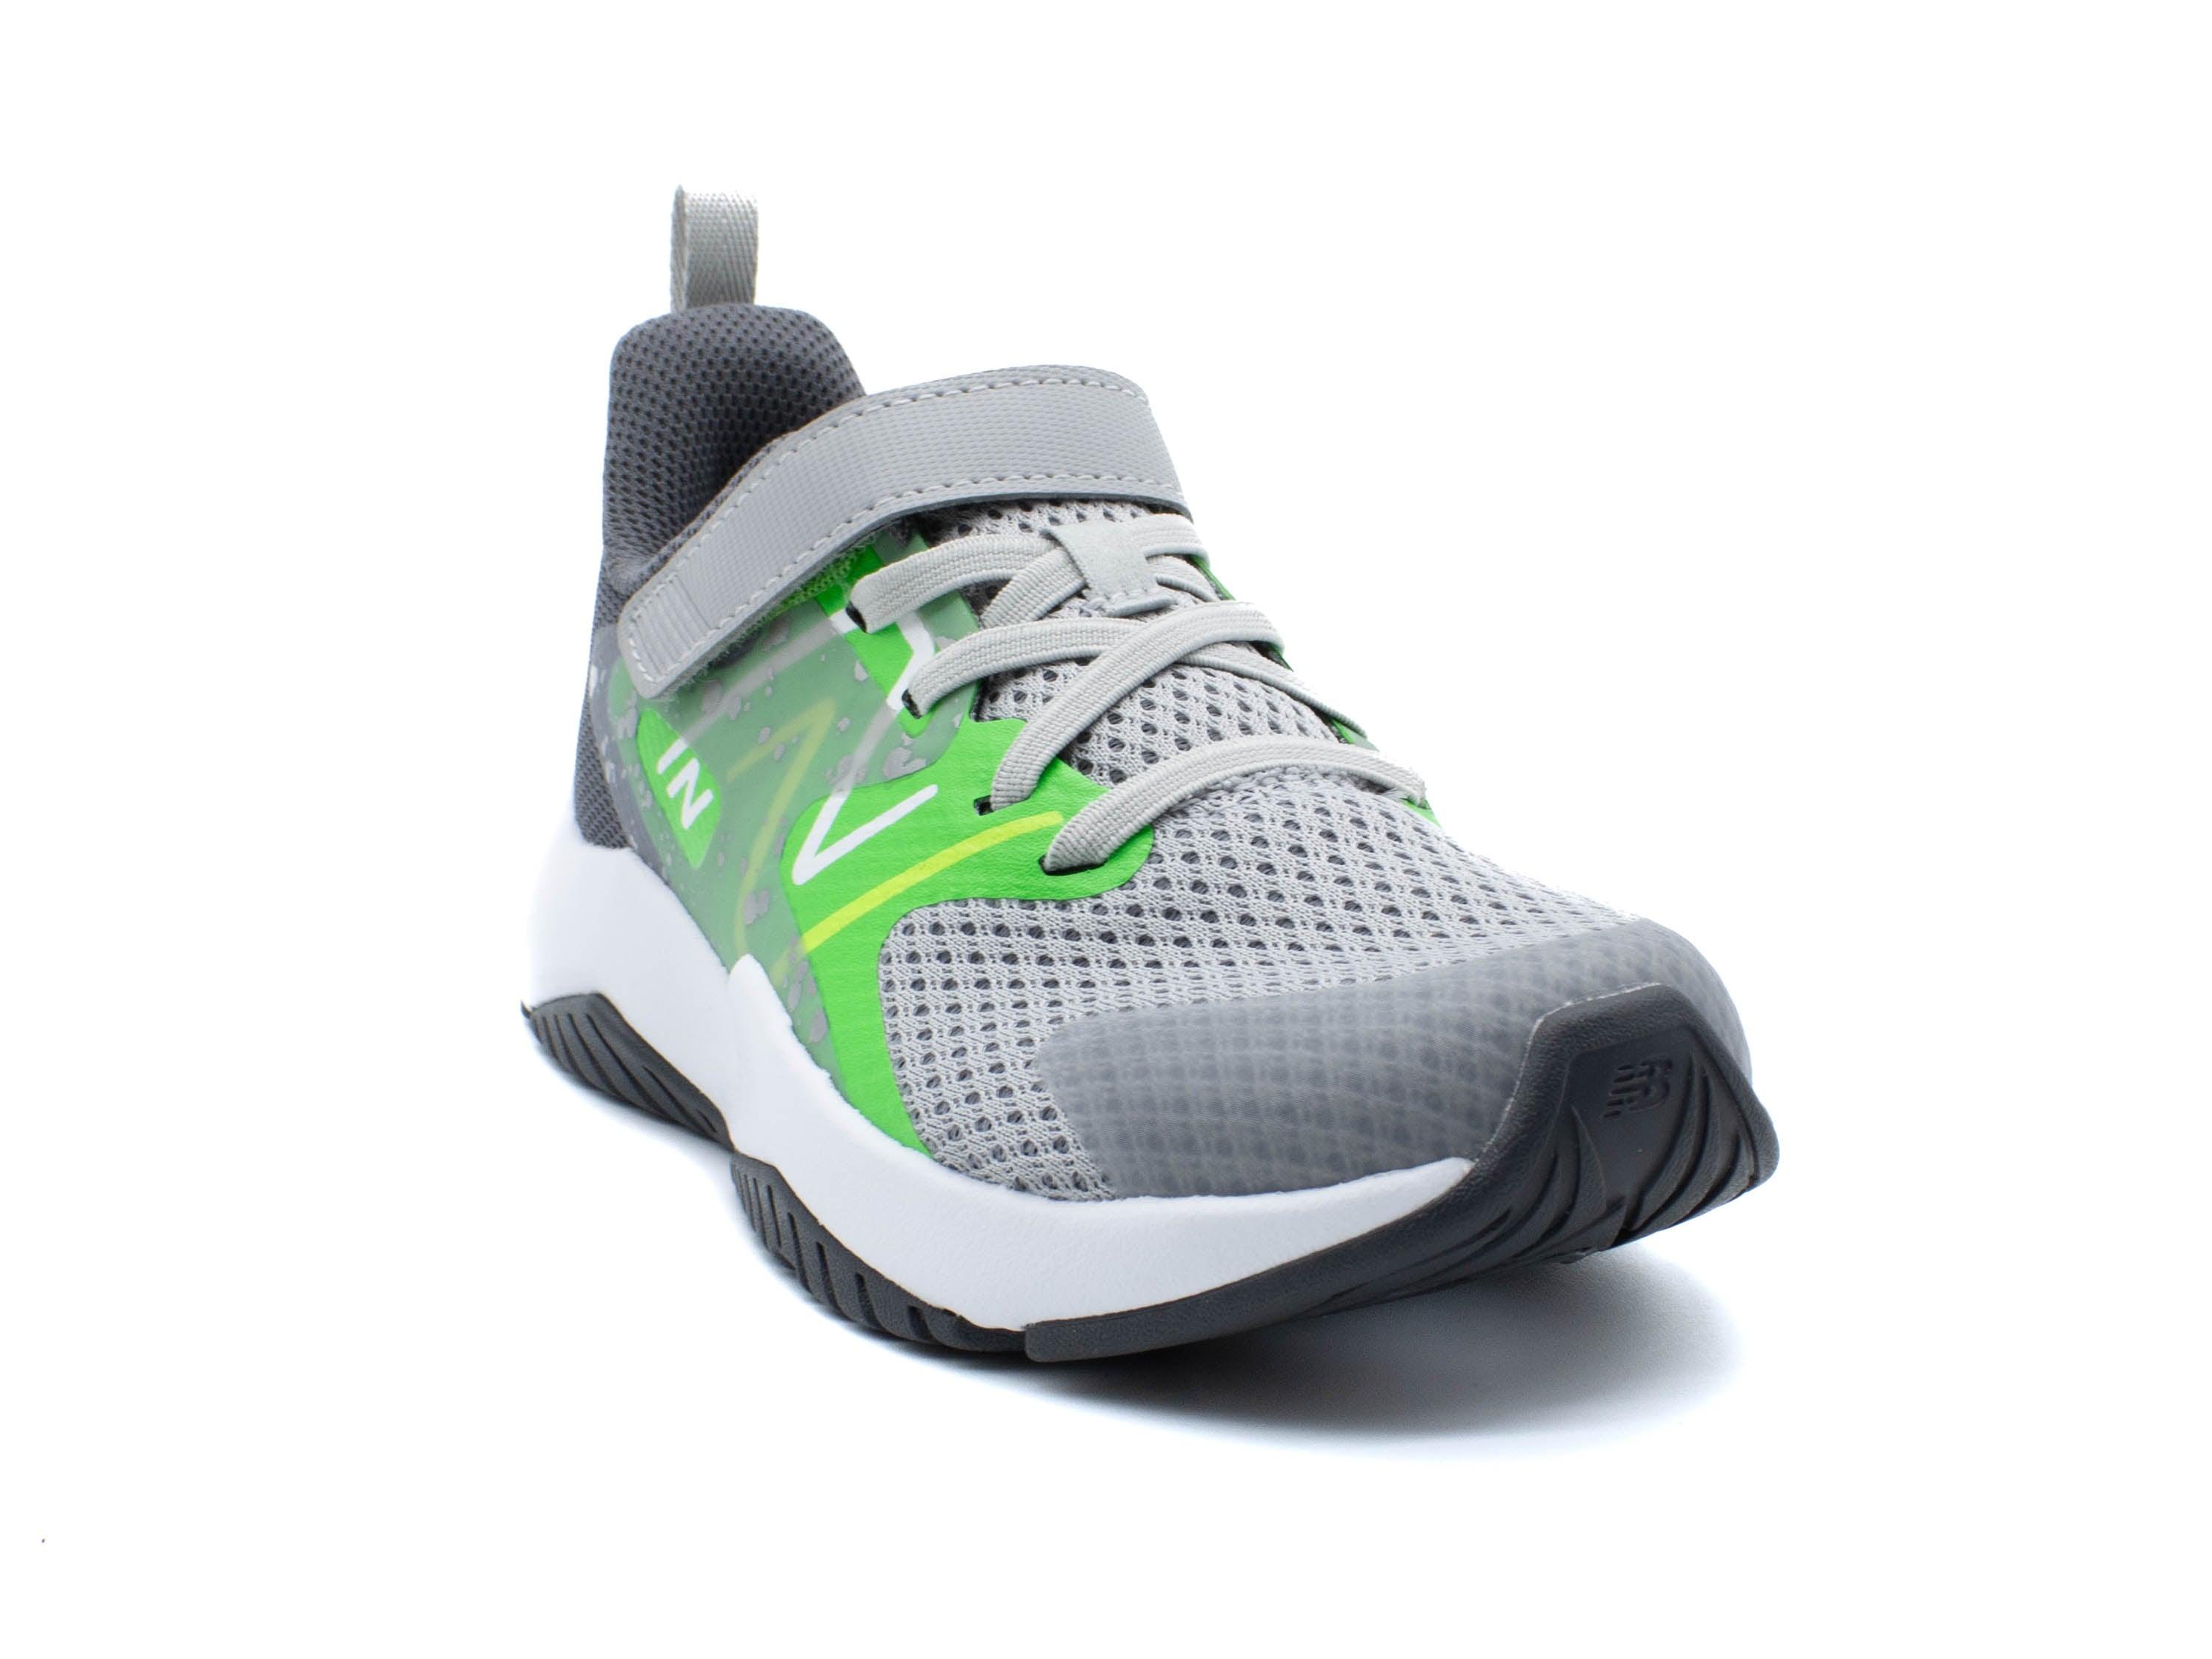 NEW BALANCE Rave Run v2 Bungee Lace with Top Strap